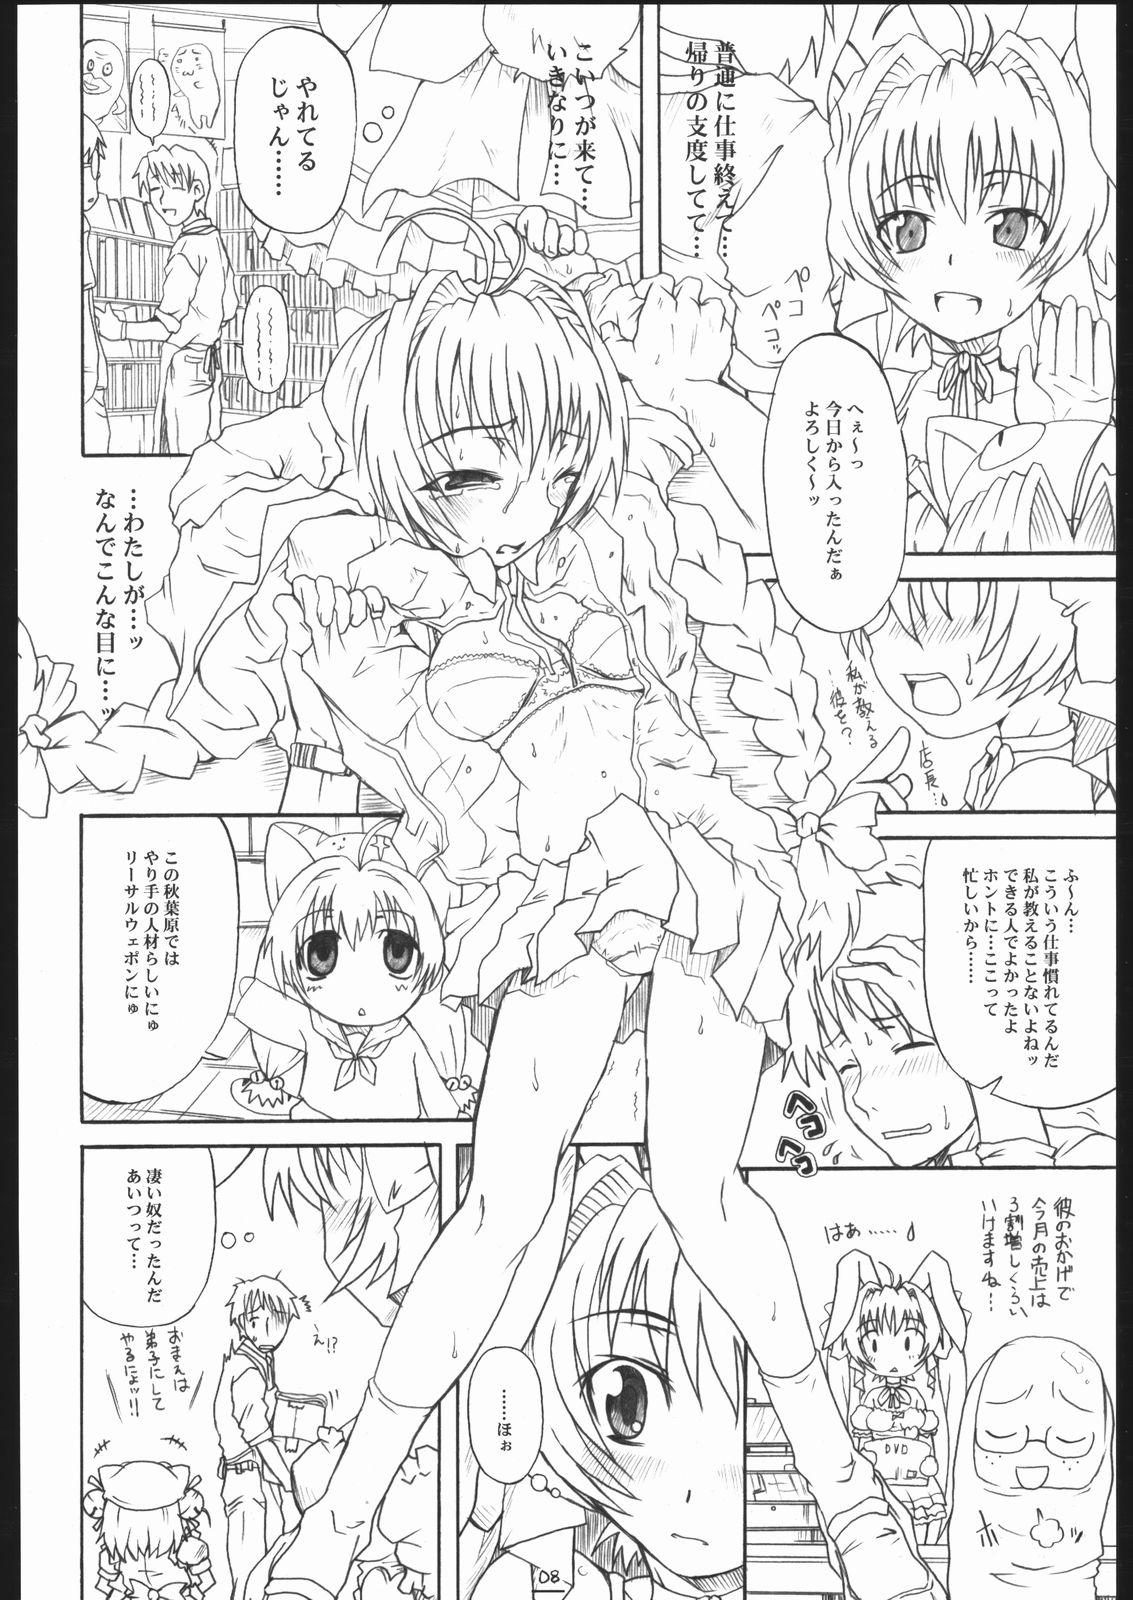 Lingerie Max Out It! 2 - Di gi charat Kitchen - Page 7